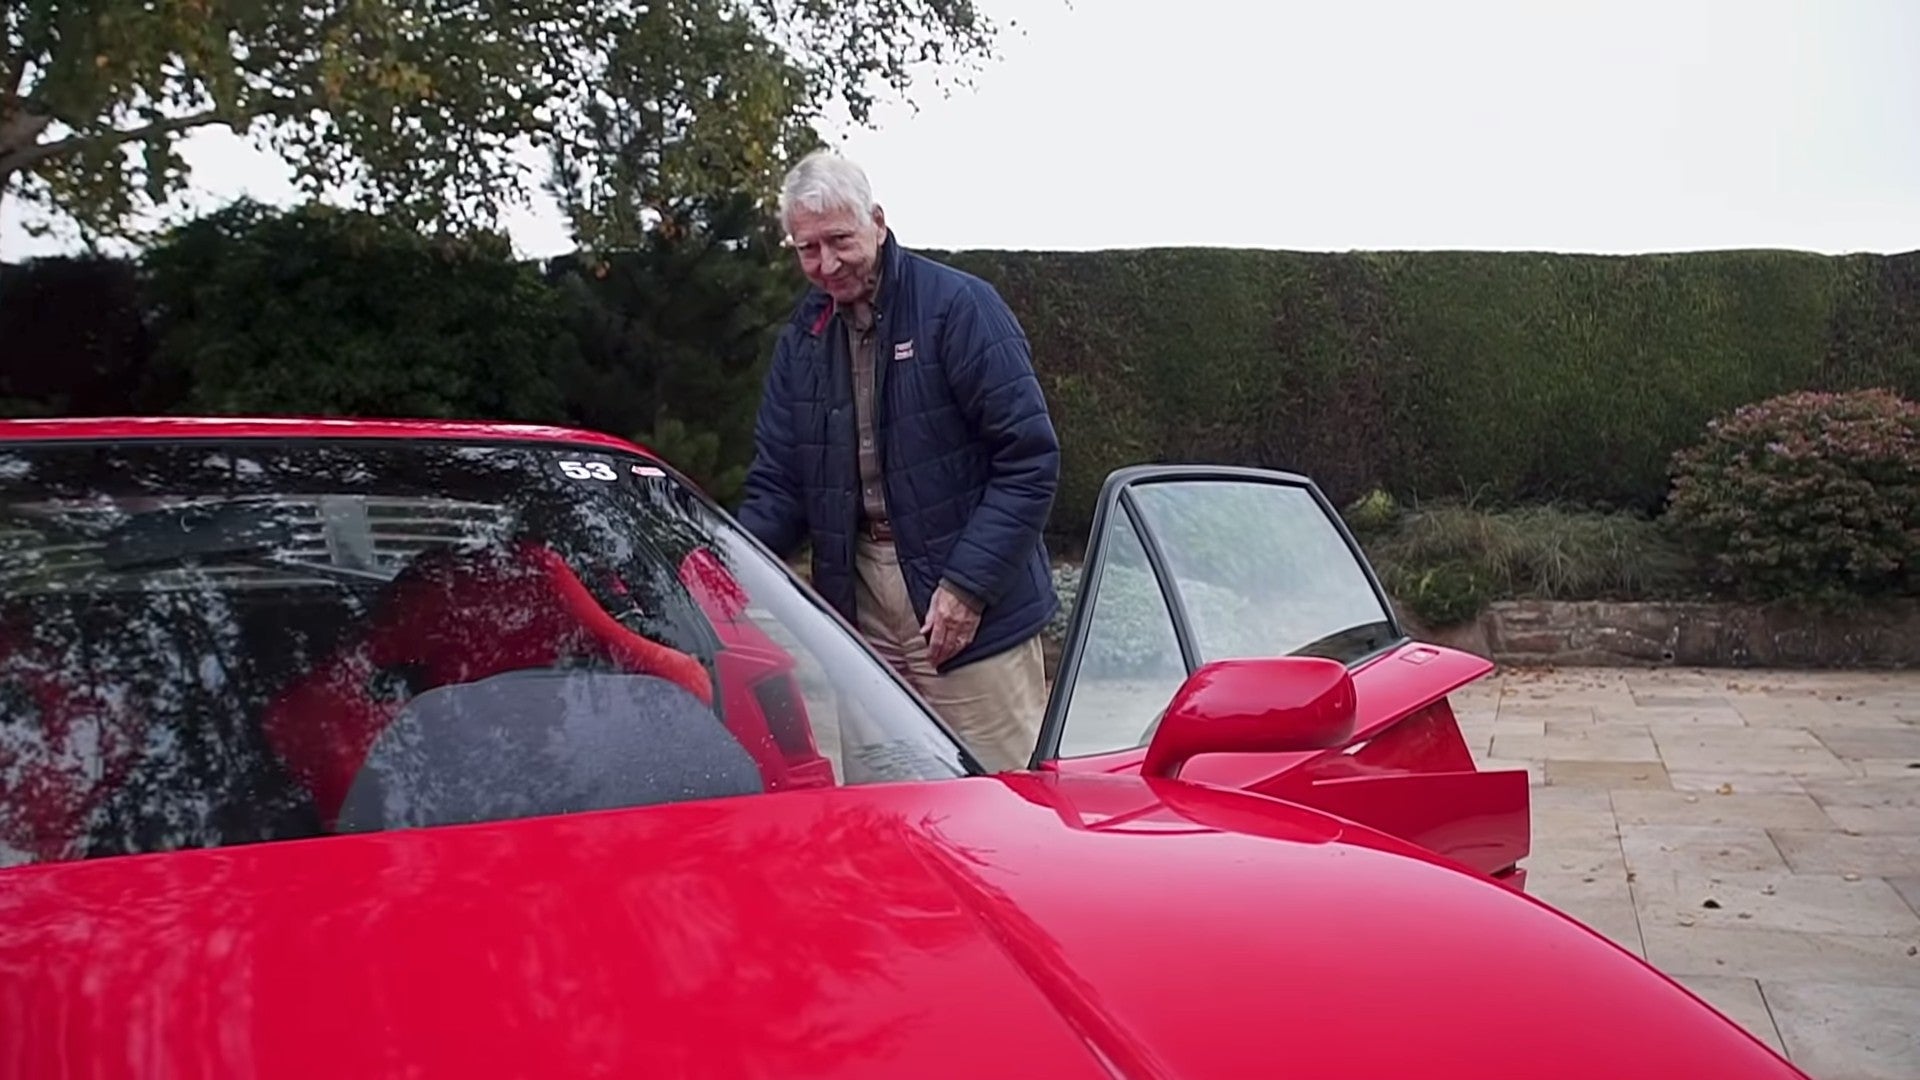 Goals: Drive Your Ferrari F40 When You Turn 80, Like This Guy